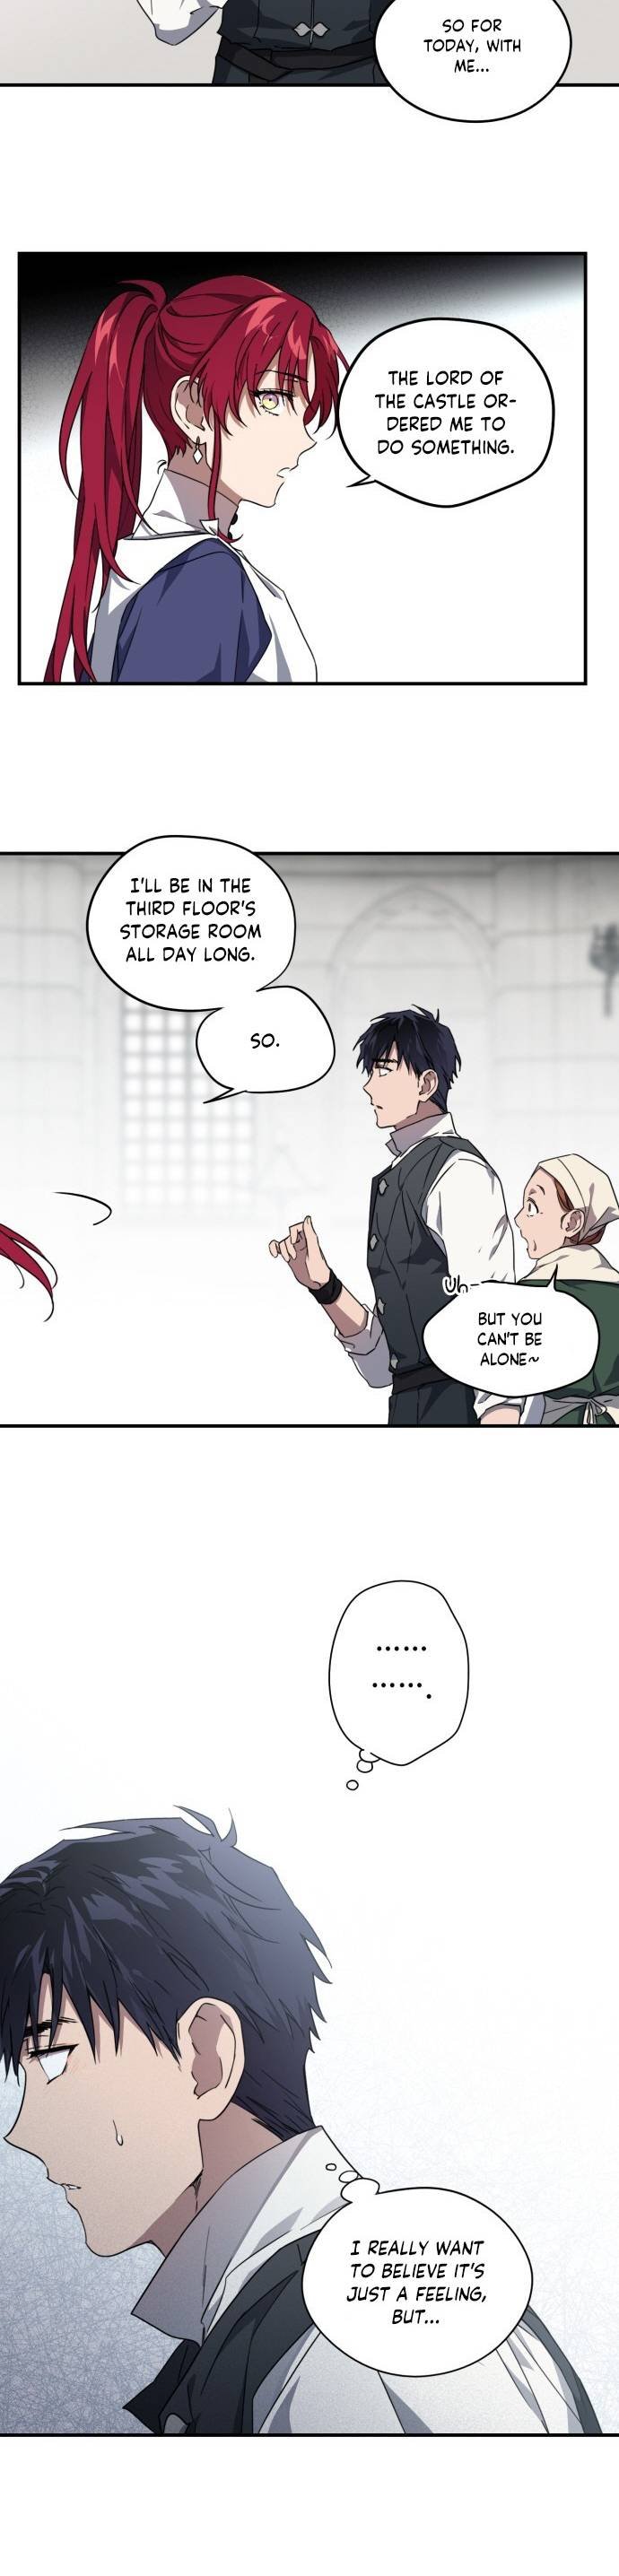 blinded-by-the-setting-sun-chap-32-20